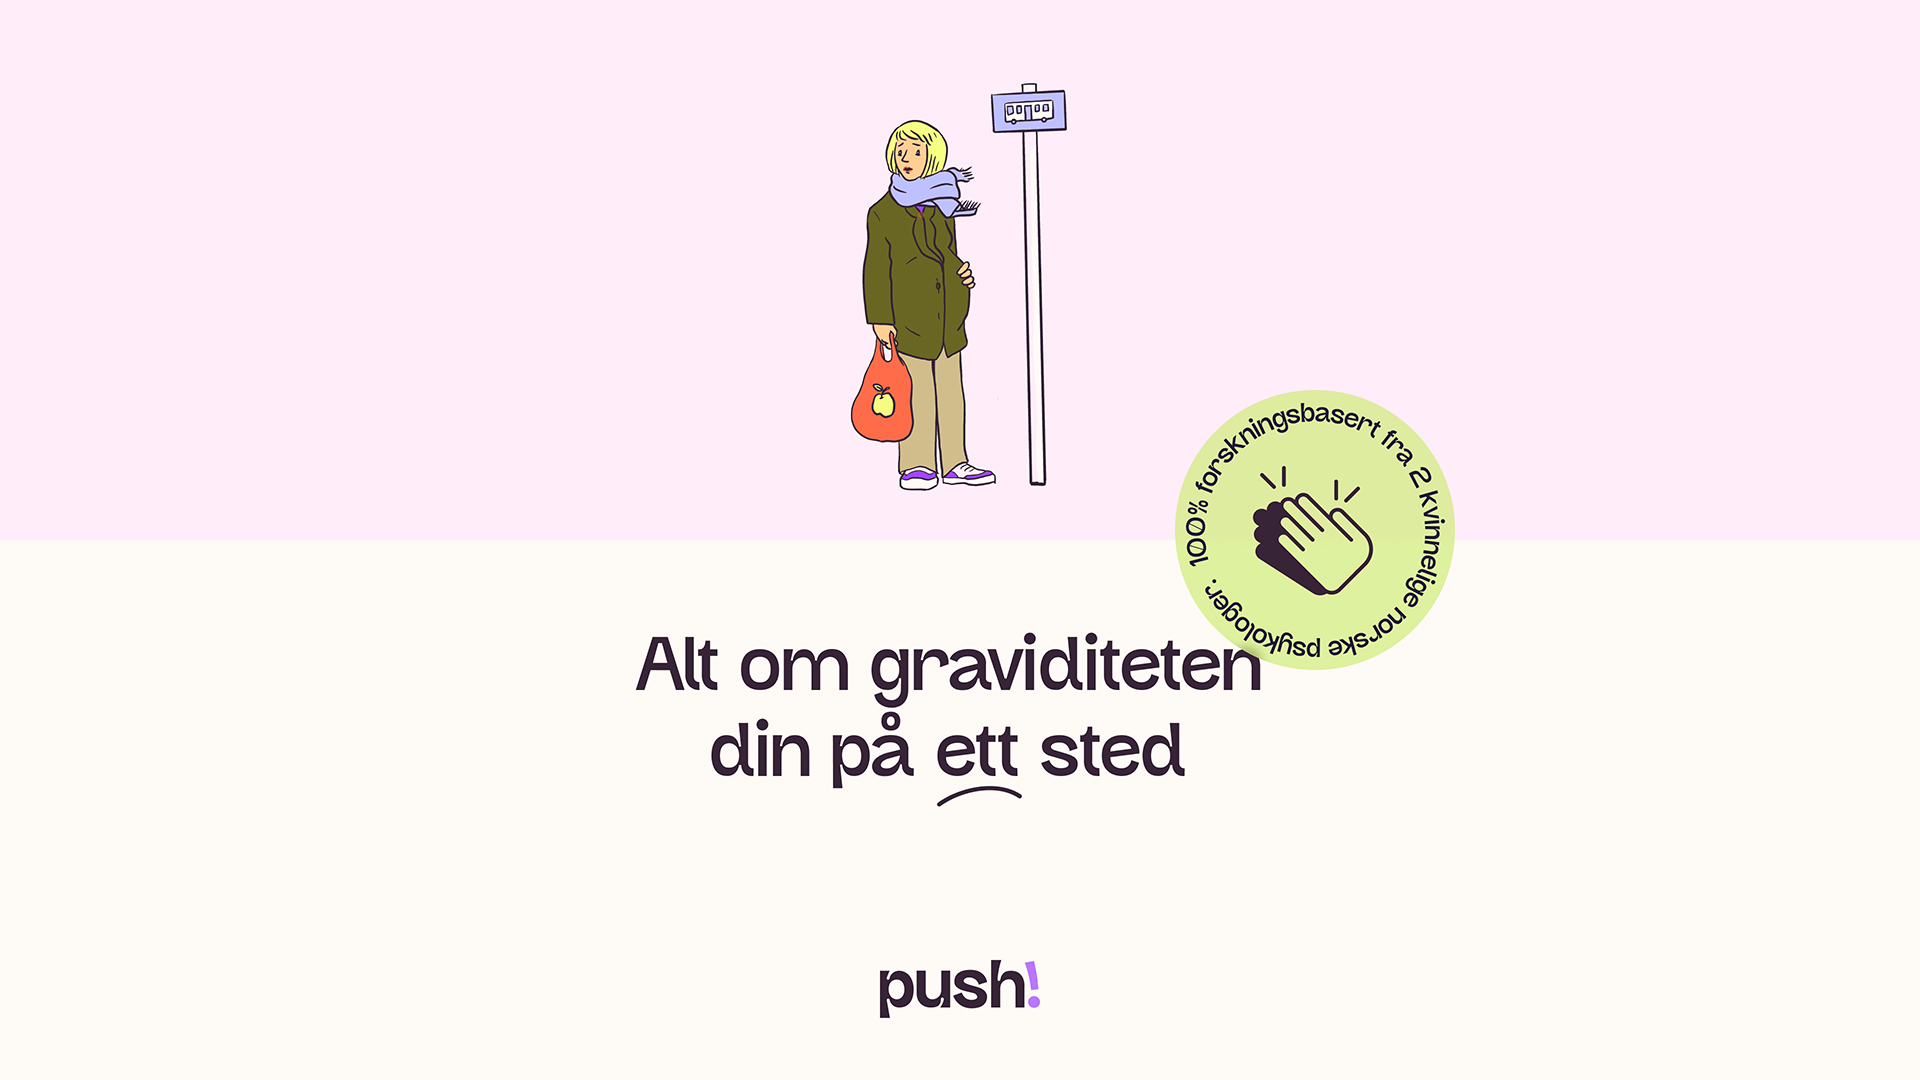 An illustration of a pregnant woman waiting for the bus.